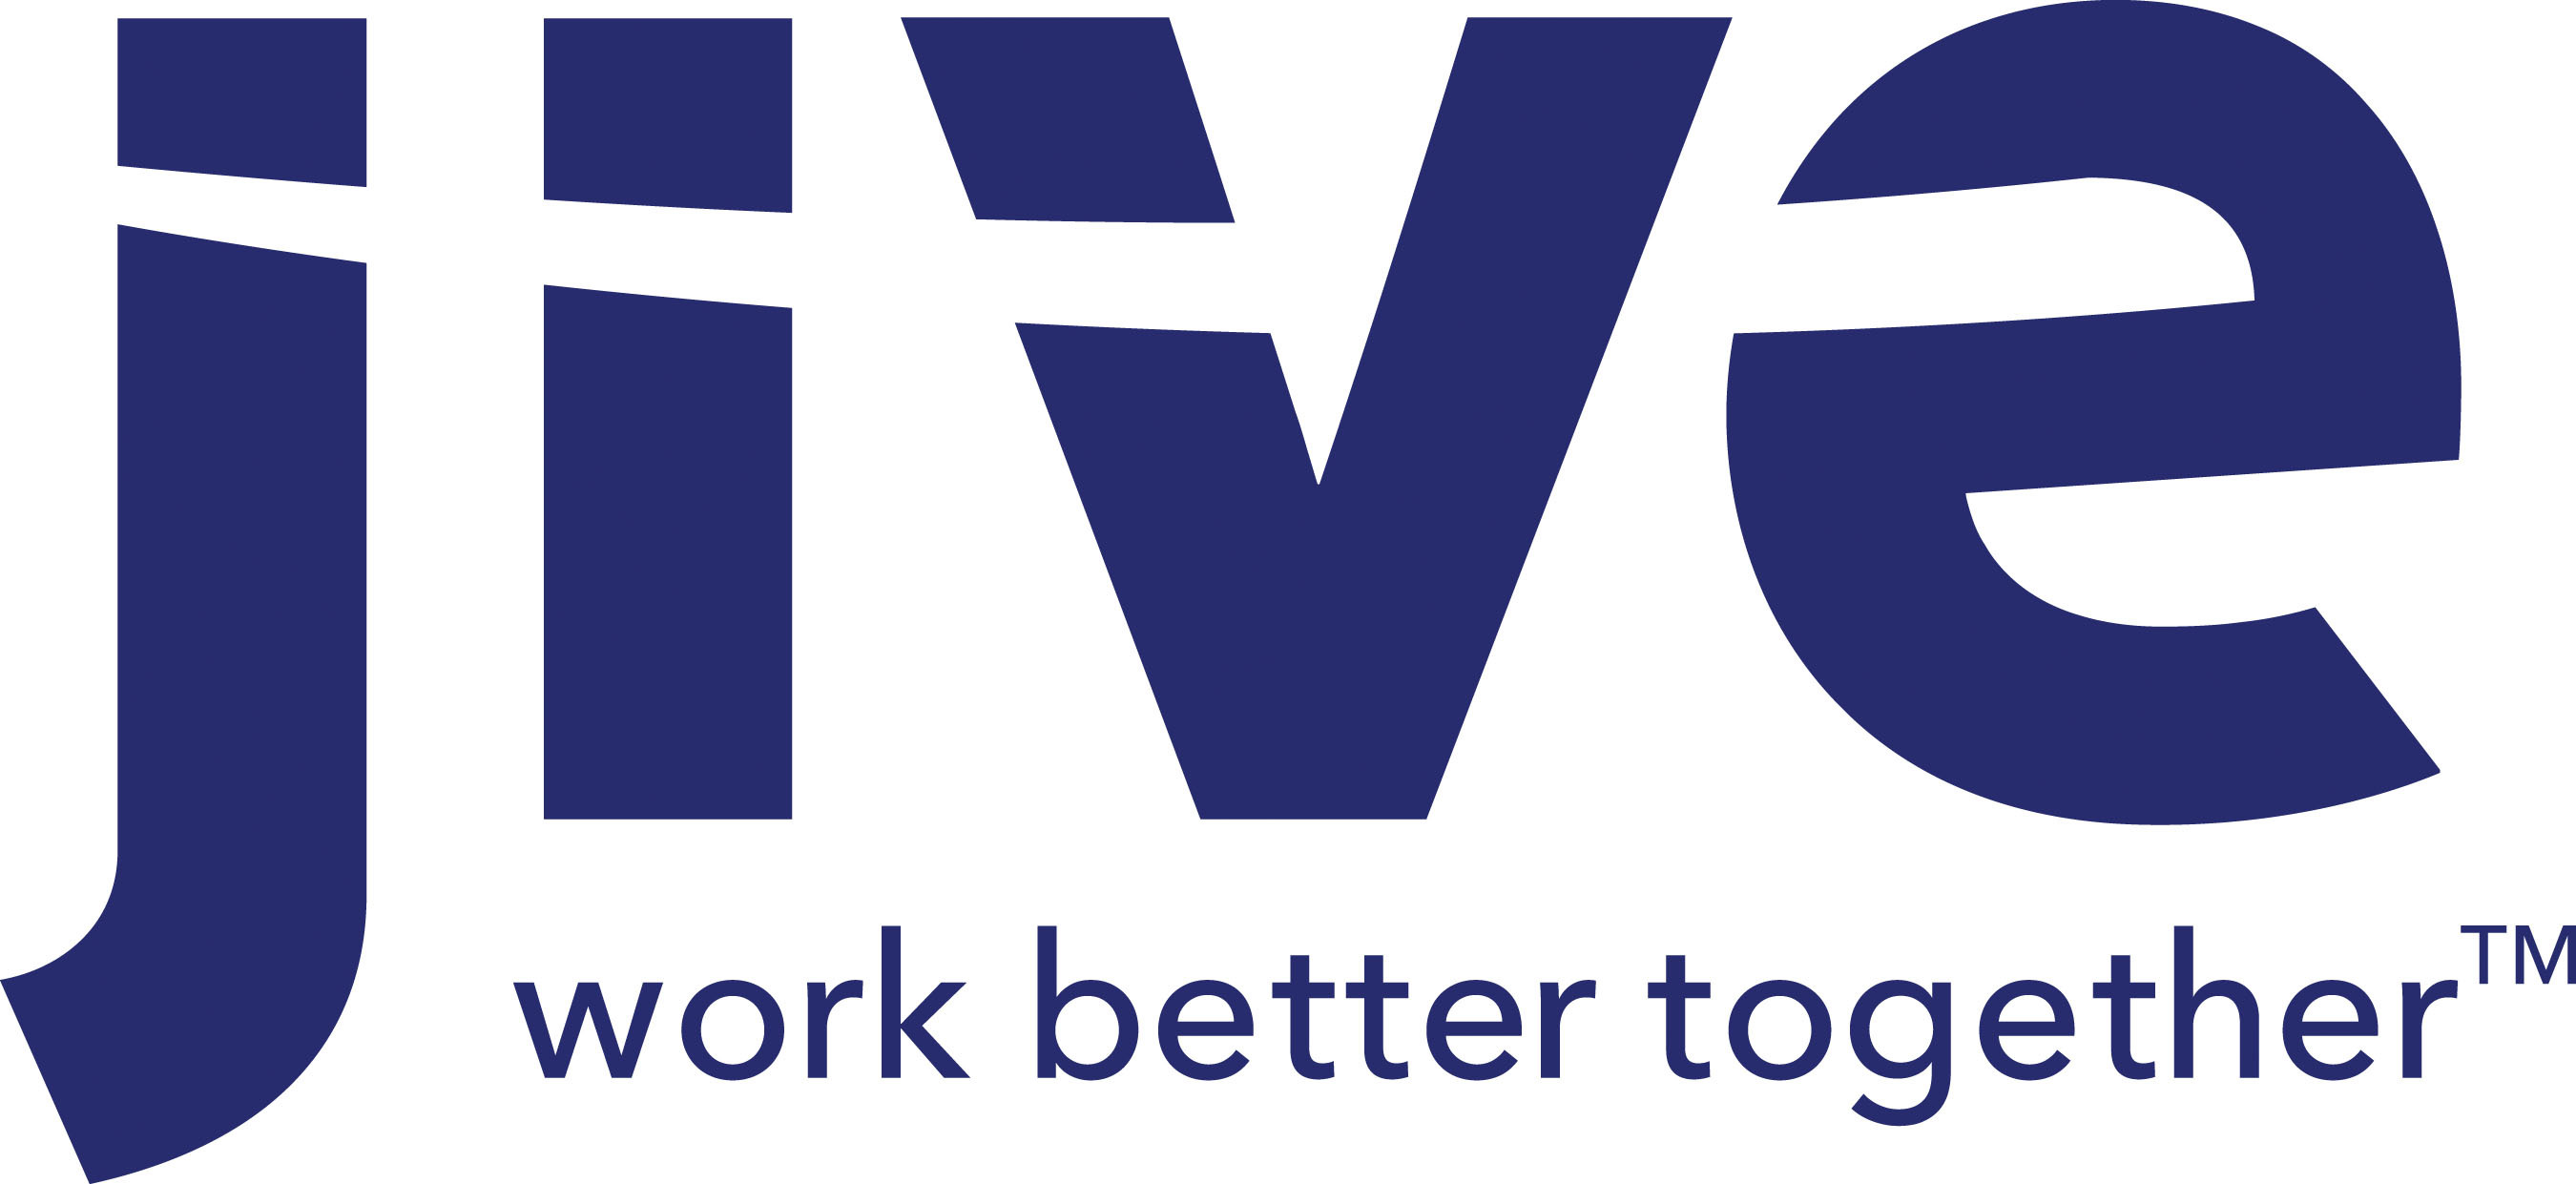 @jivesoftware ~ working better together.